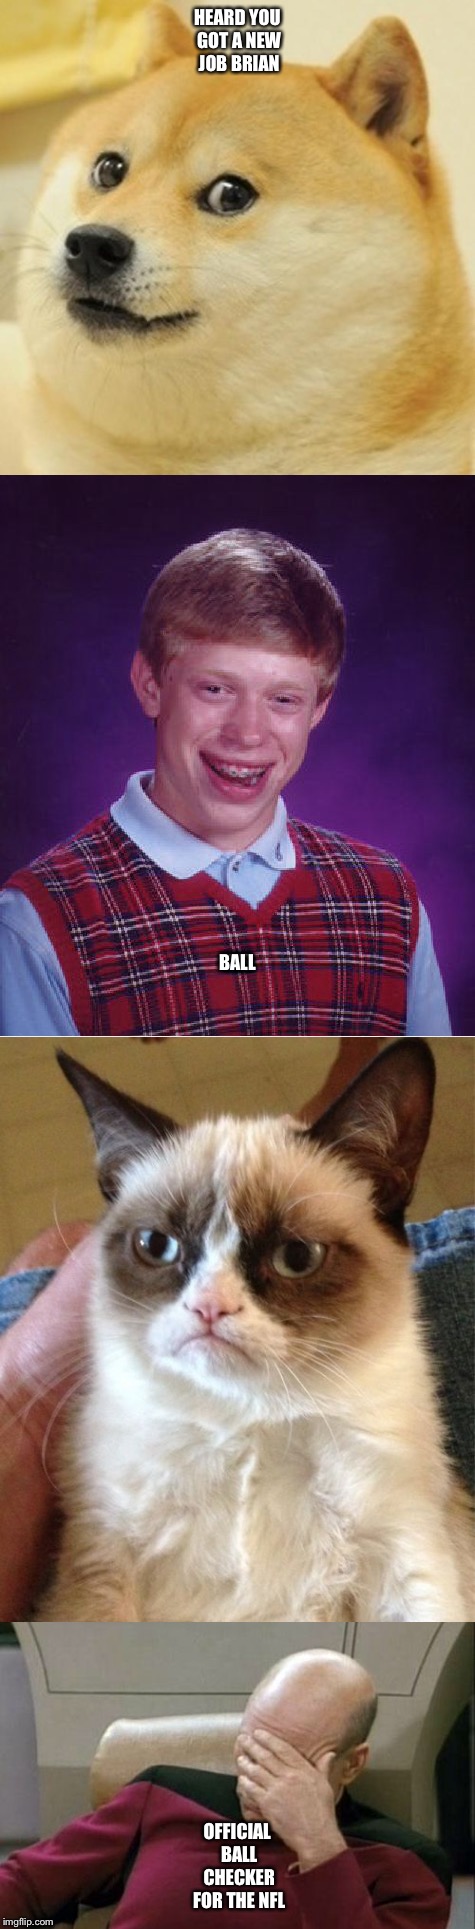 Brian gets job | HEARD YOU GOT A NEW JOB BRIAN; YES; BALL; OFFICIAL BALL CHECKER FOR THE NFL | image tagged in bad luck brian,funny memes,nfl memes,grumpy cat,captain picard facepalm | made w/ Imgflip meme maker